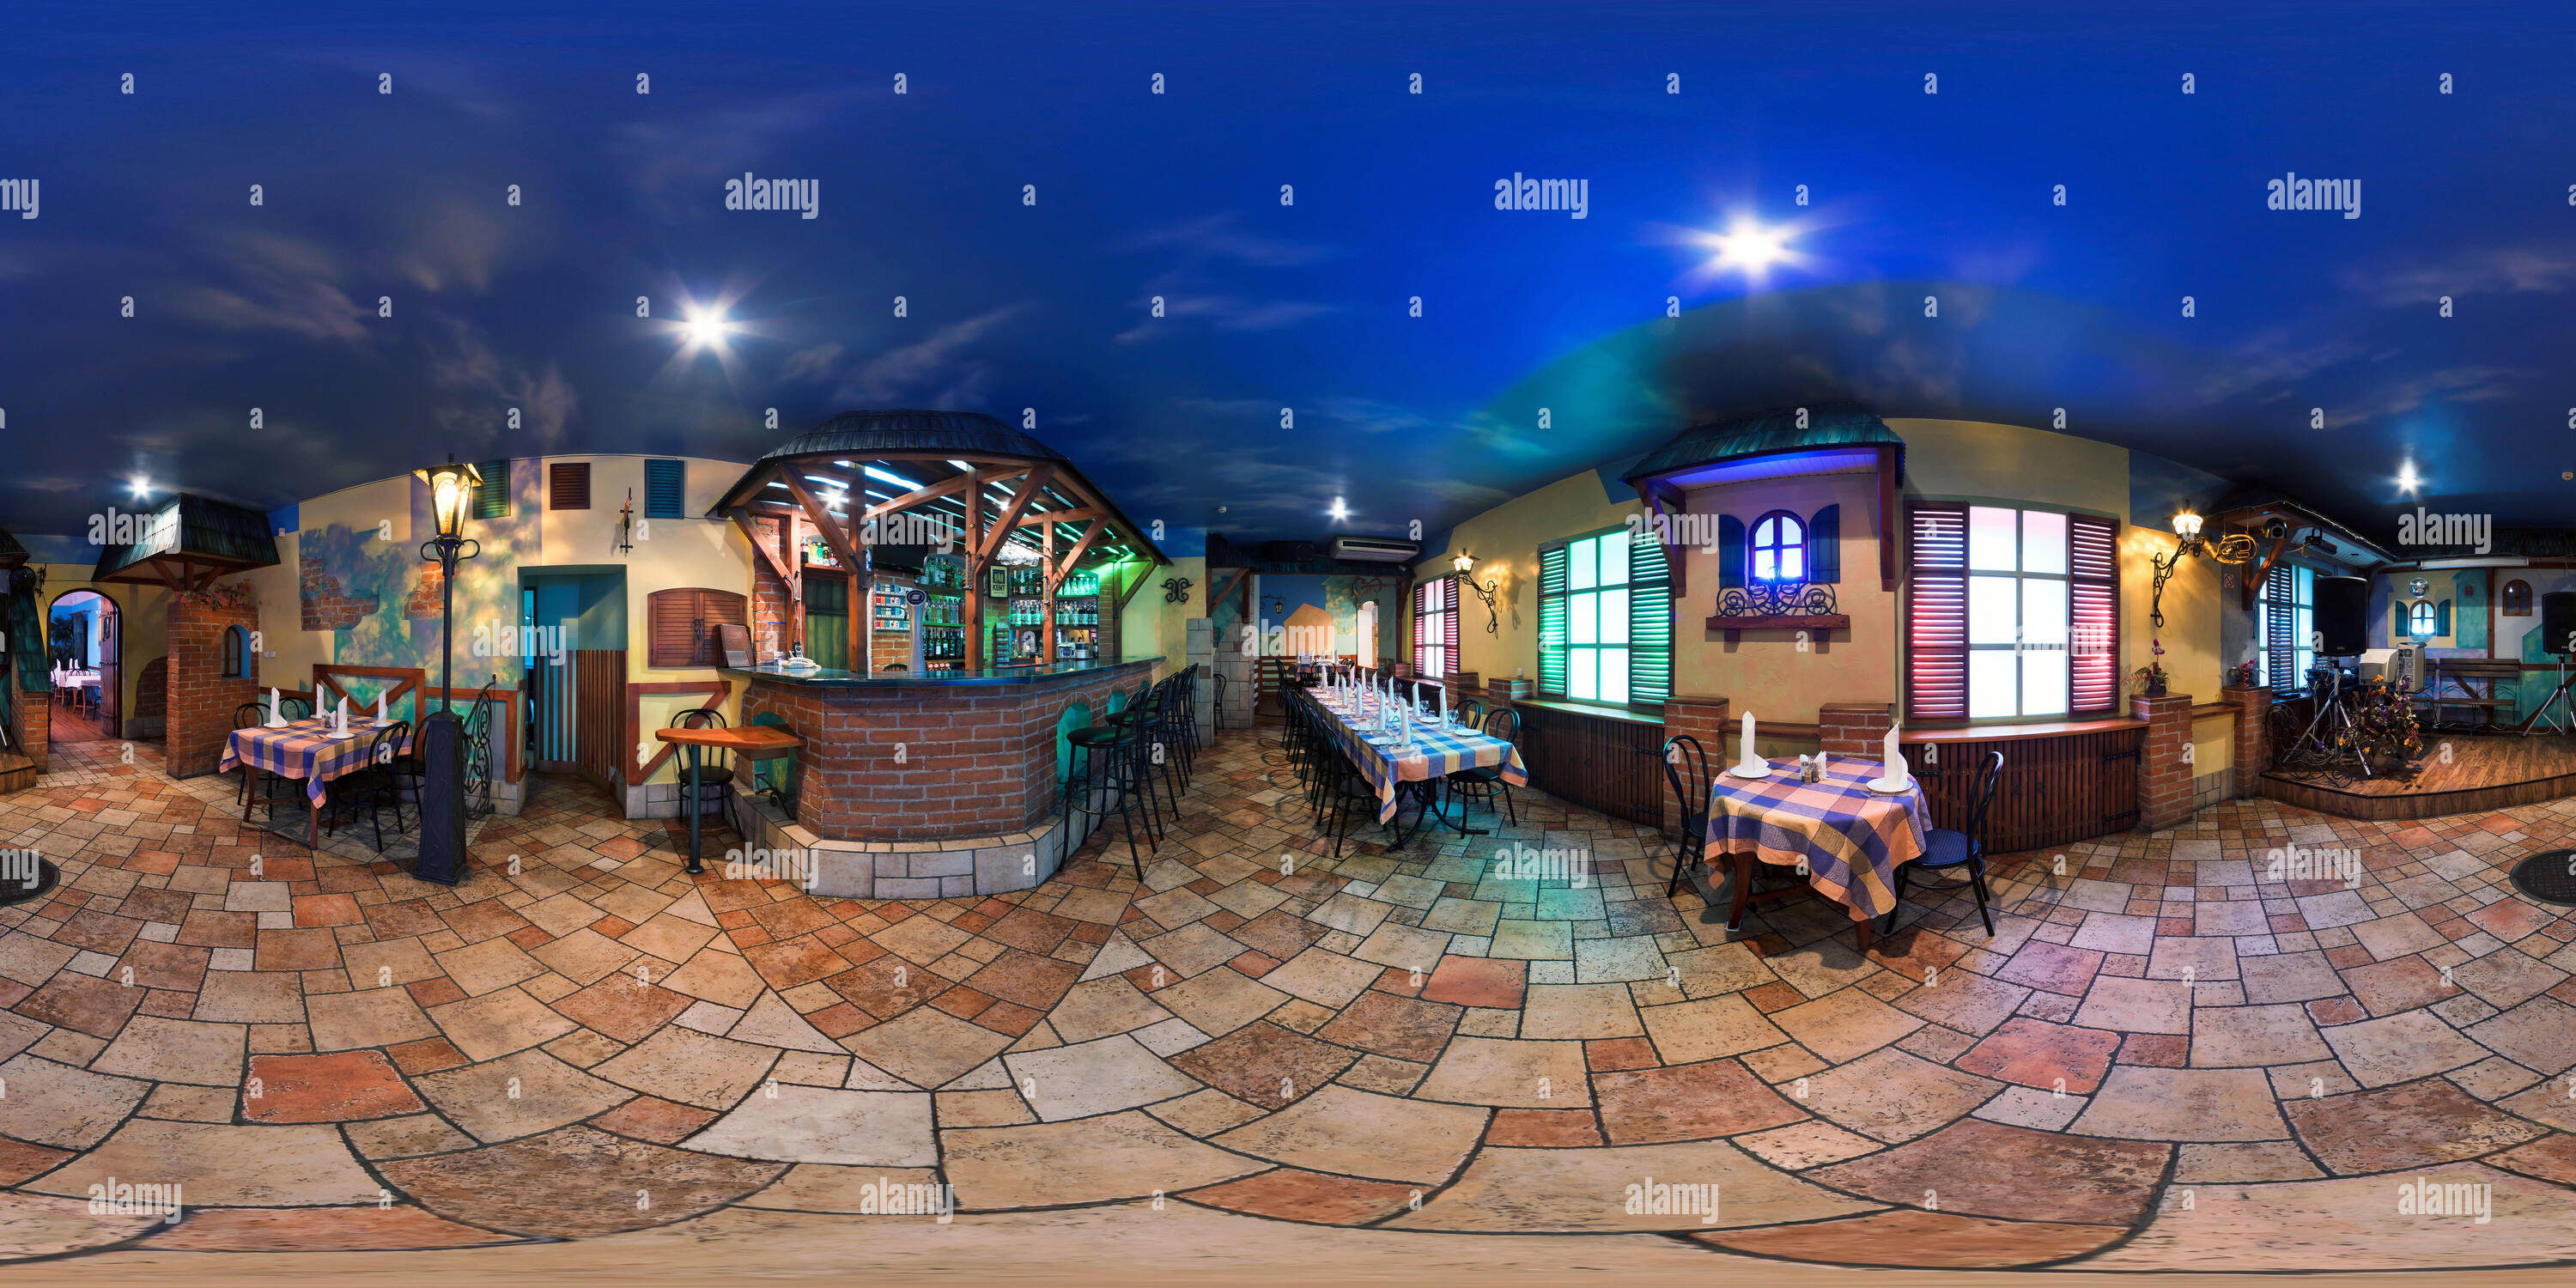 360 degree panoramic view of GRODNO, BELARUS - OCTOBER 16, 2011: full 360 degree panorama in equirectangular spherical projection in vintage style cafe, VR content